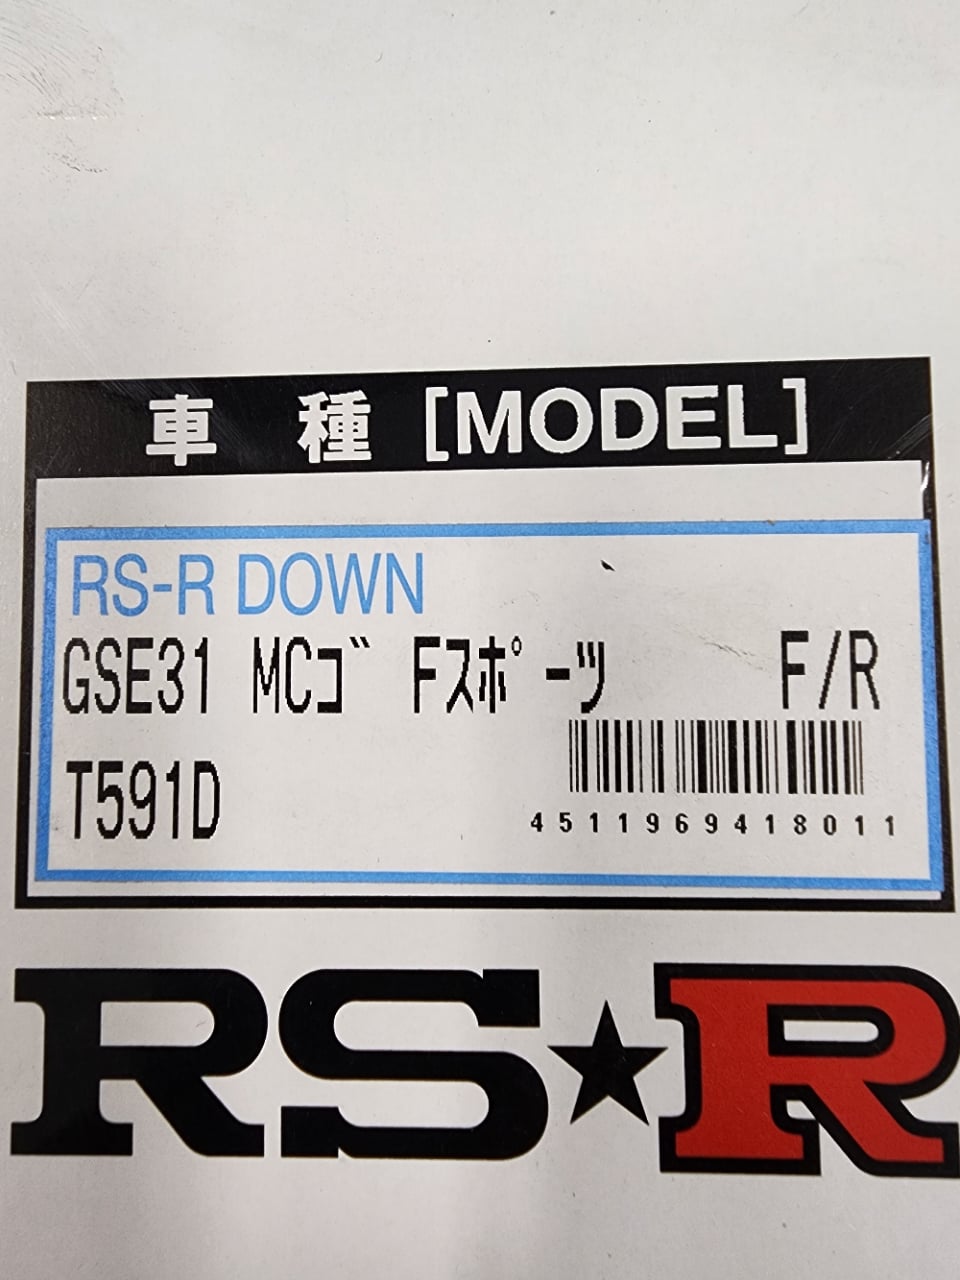 2021 Lexus IS - RSR Down springs and H&R spacers - Fresno, CA 93723, United States